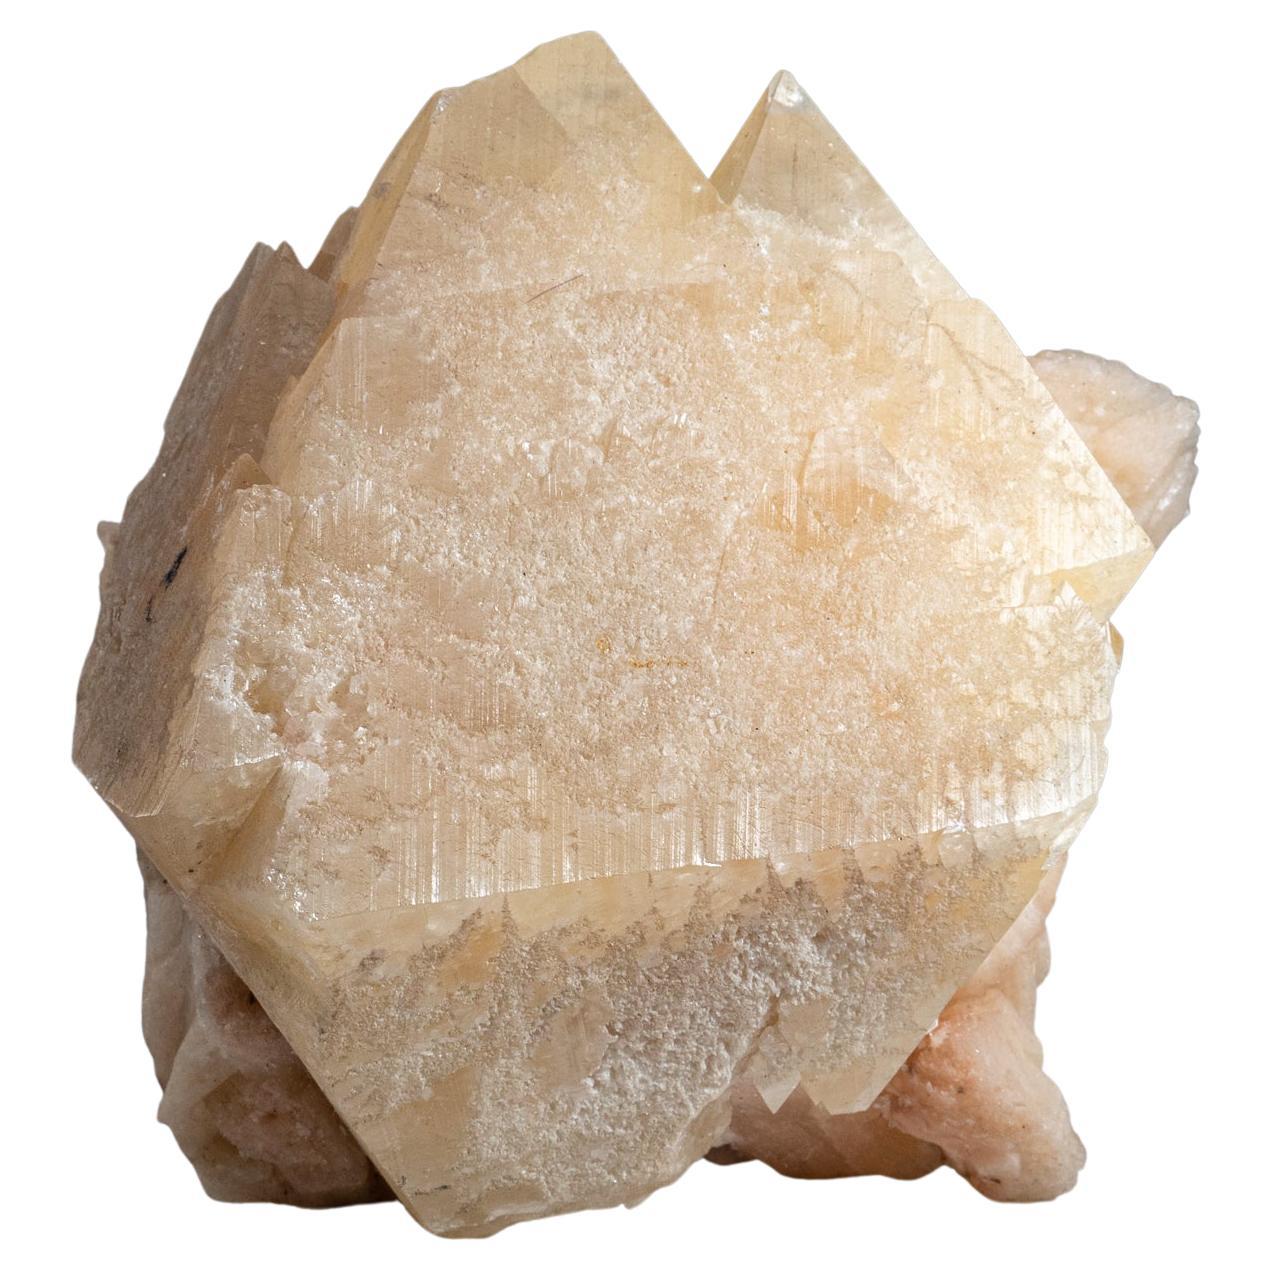 Powellite Mineral Crystal on Stilbite From India